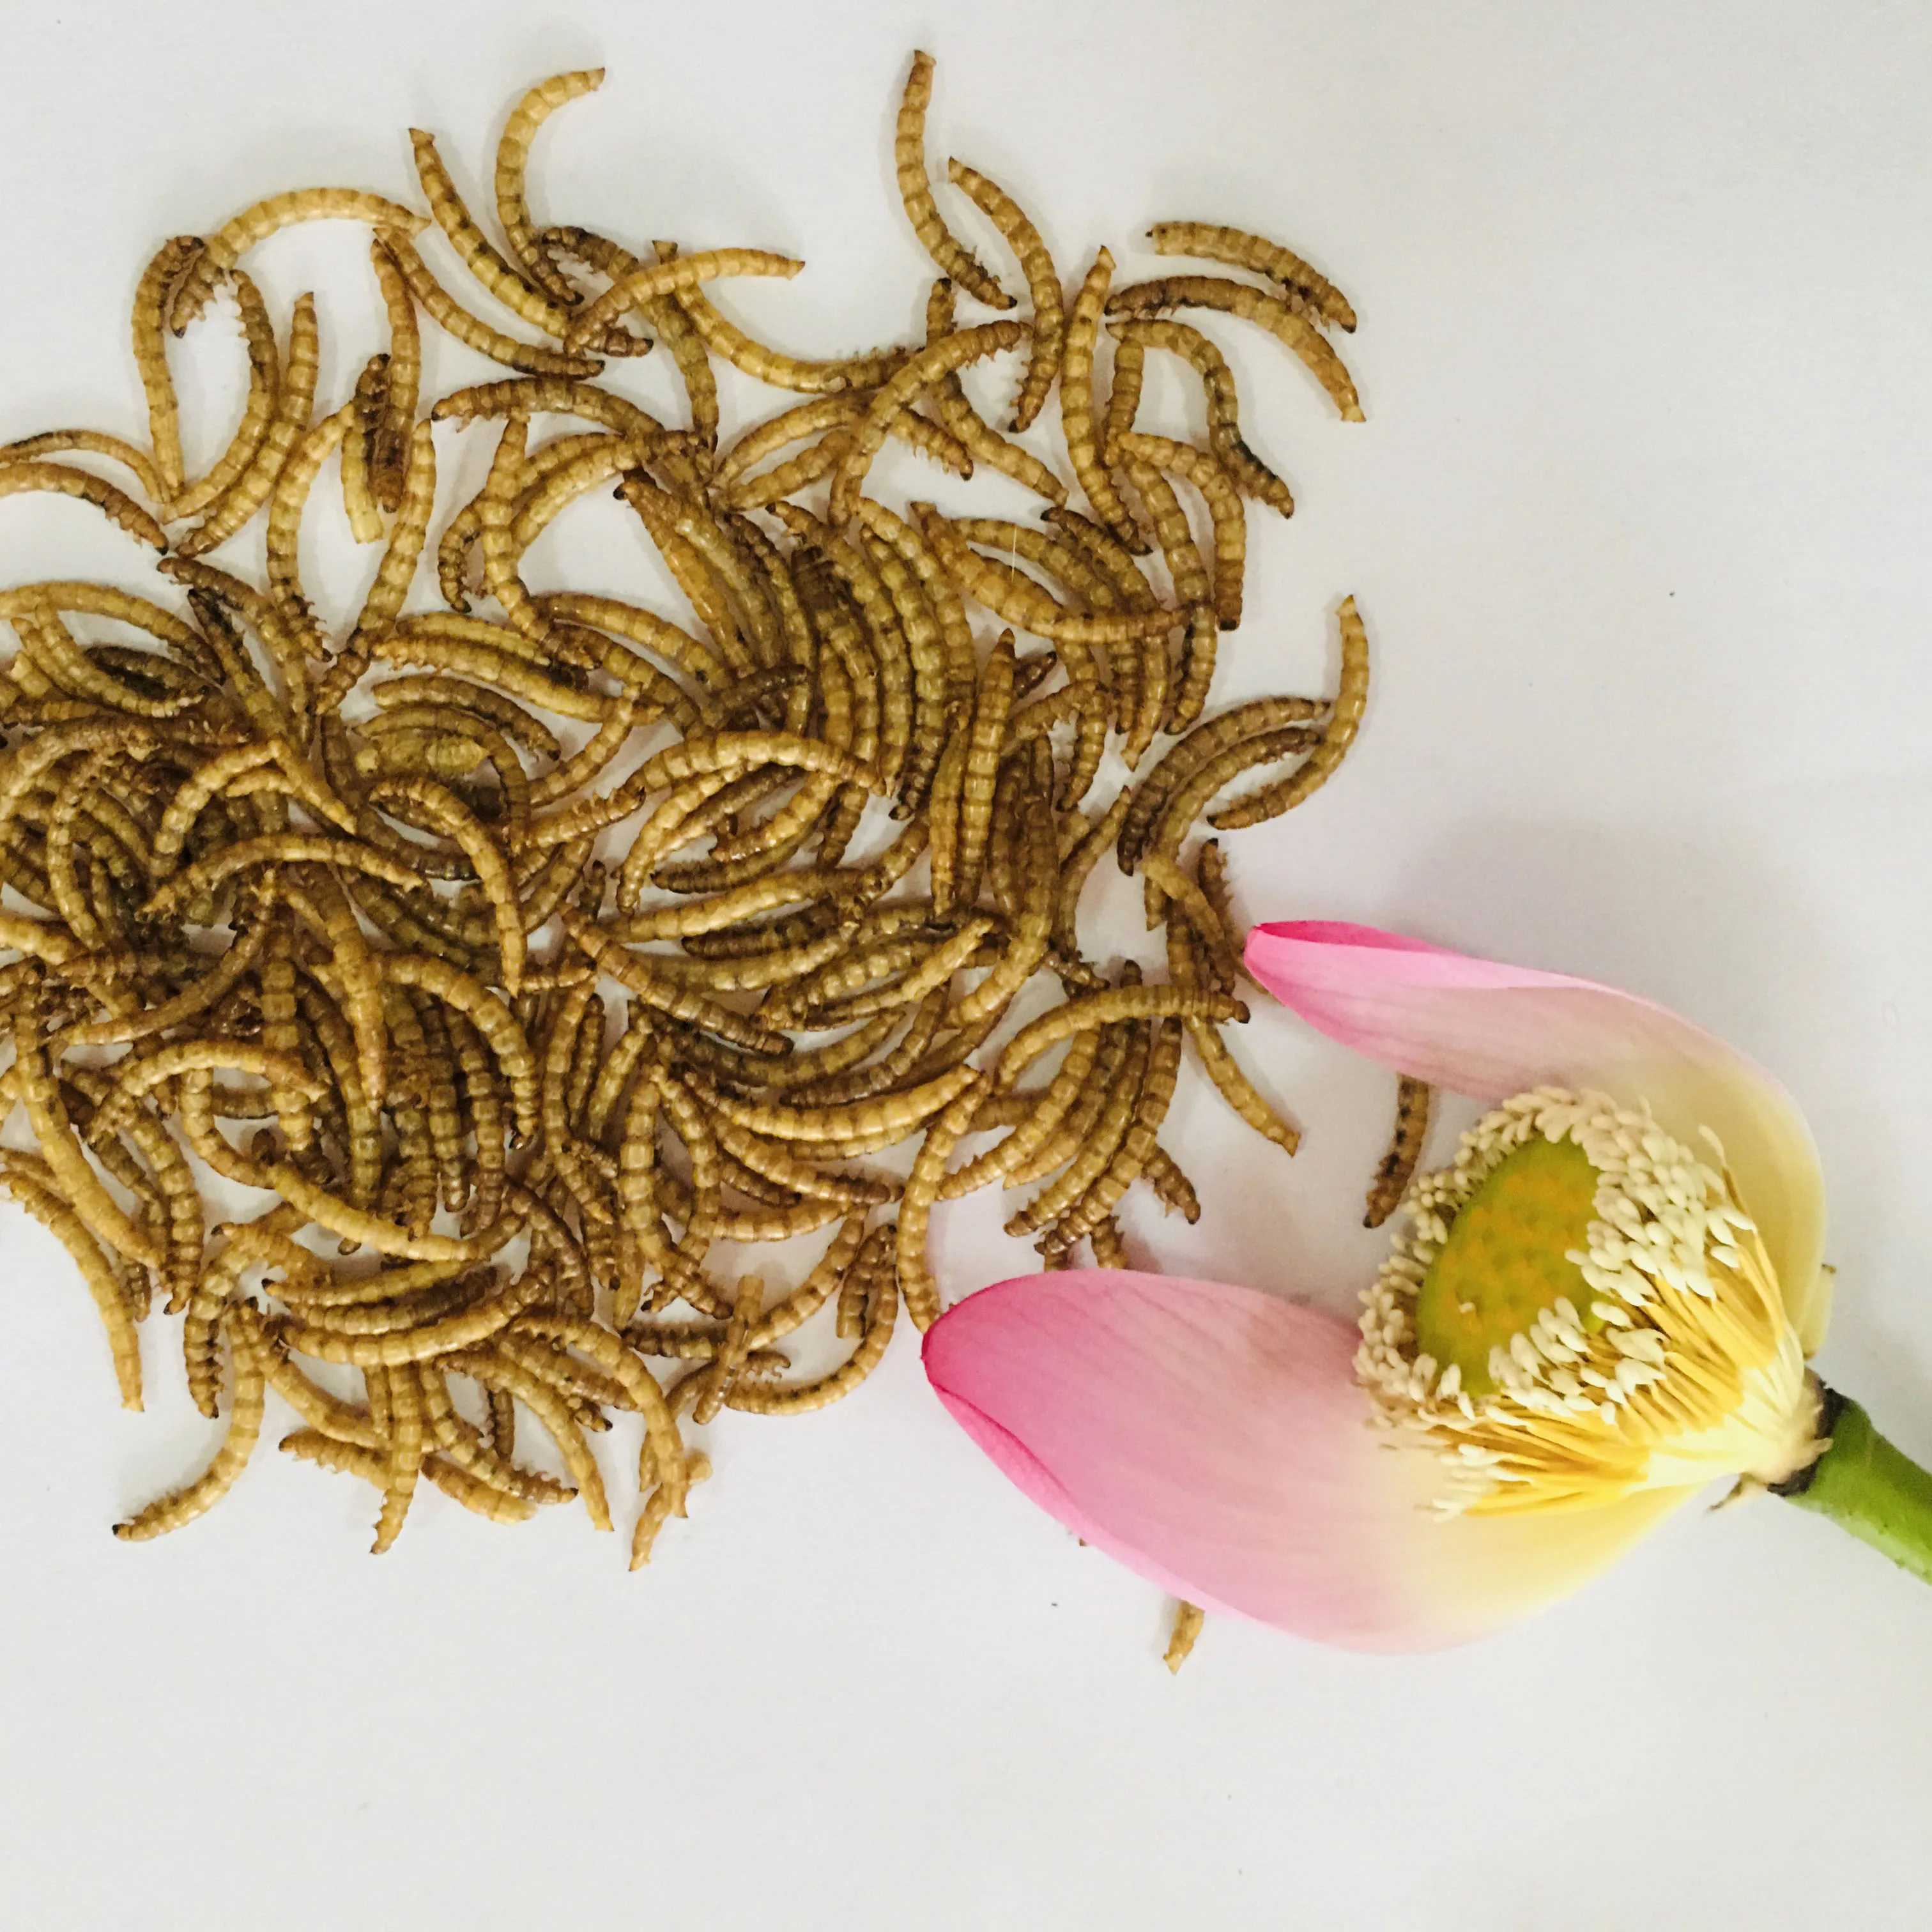 factory Own breeding farms best price superior quality dry mealworms